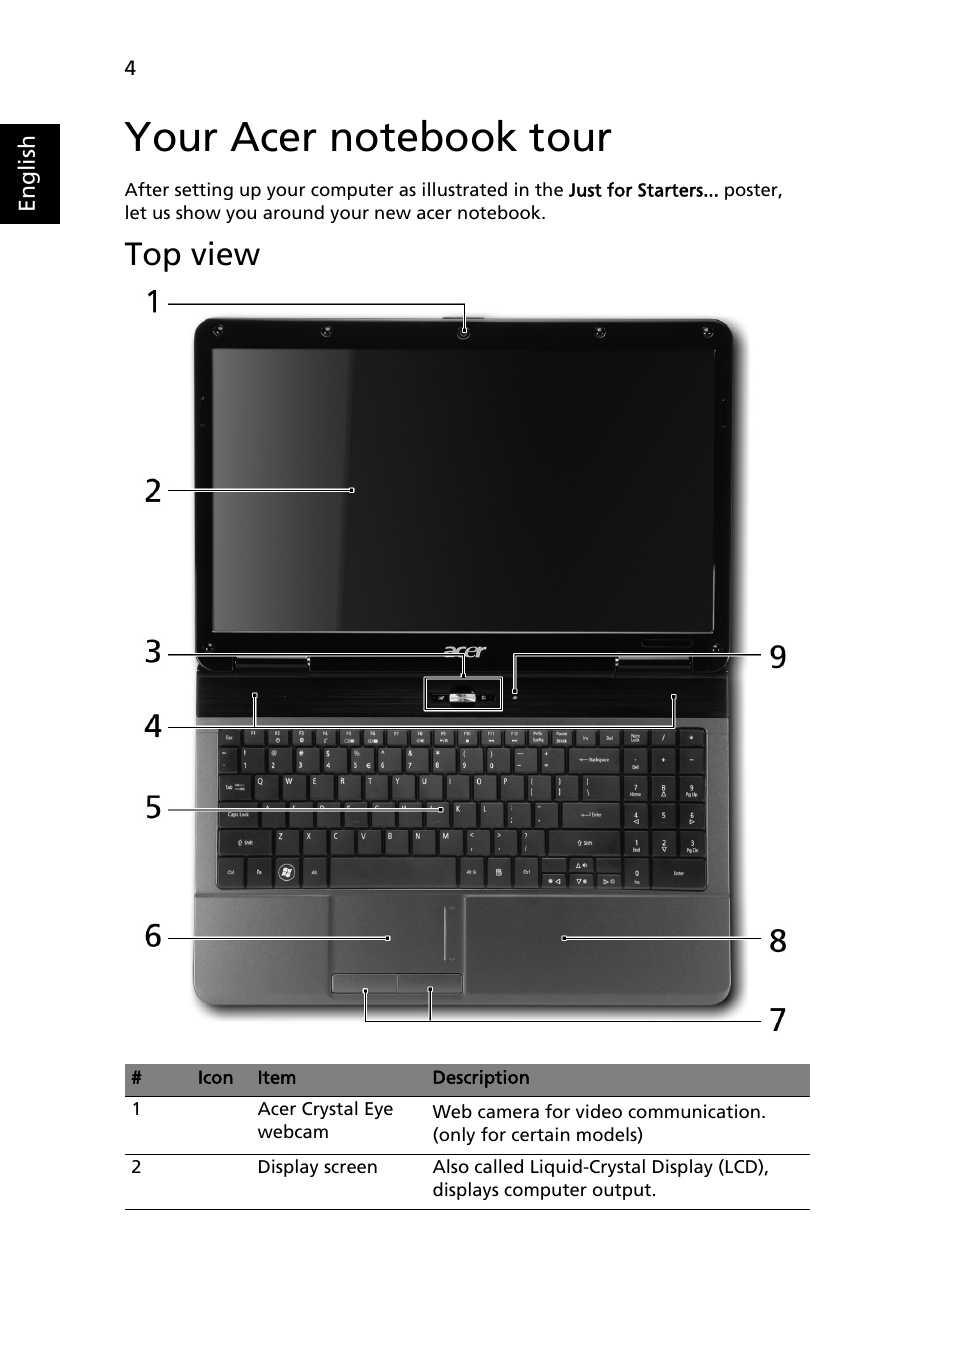 Your acer notebook tour, Top view | Acer Aspire 5732Z User Manual | Page 4  / 11